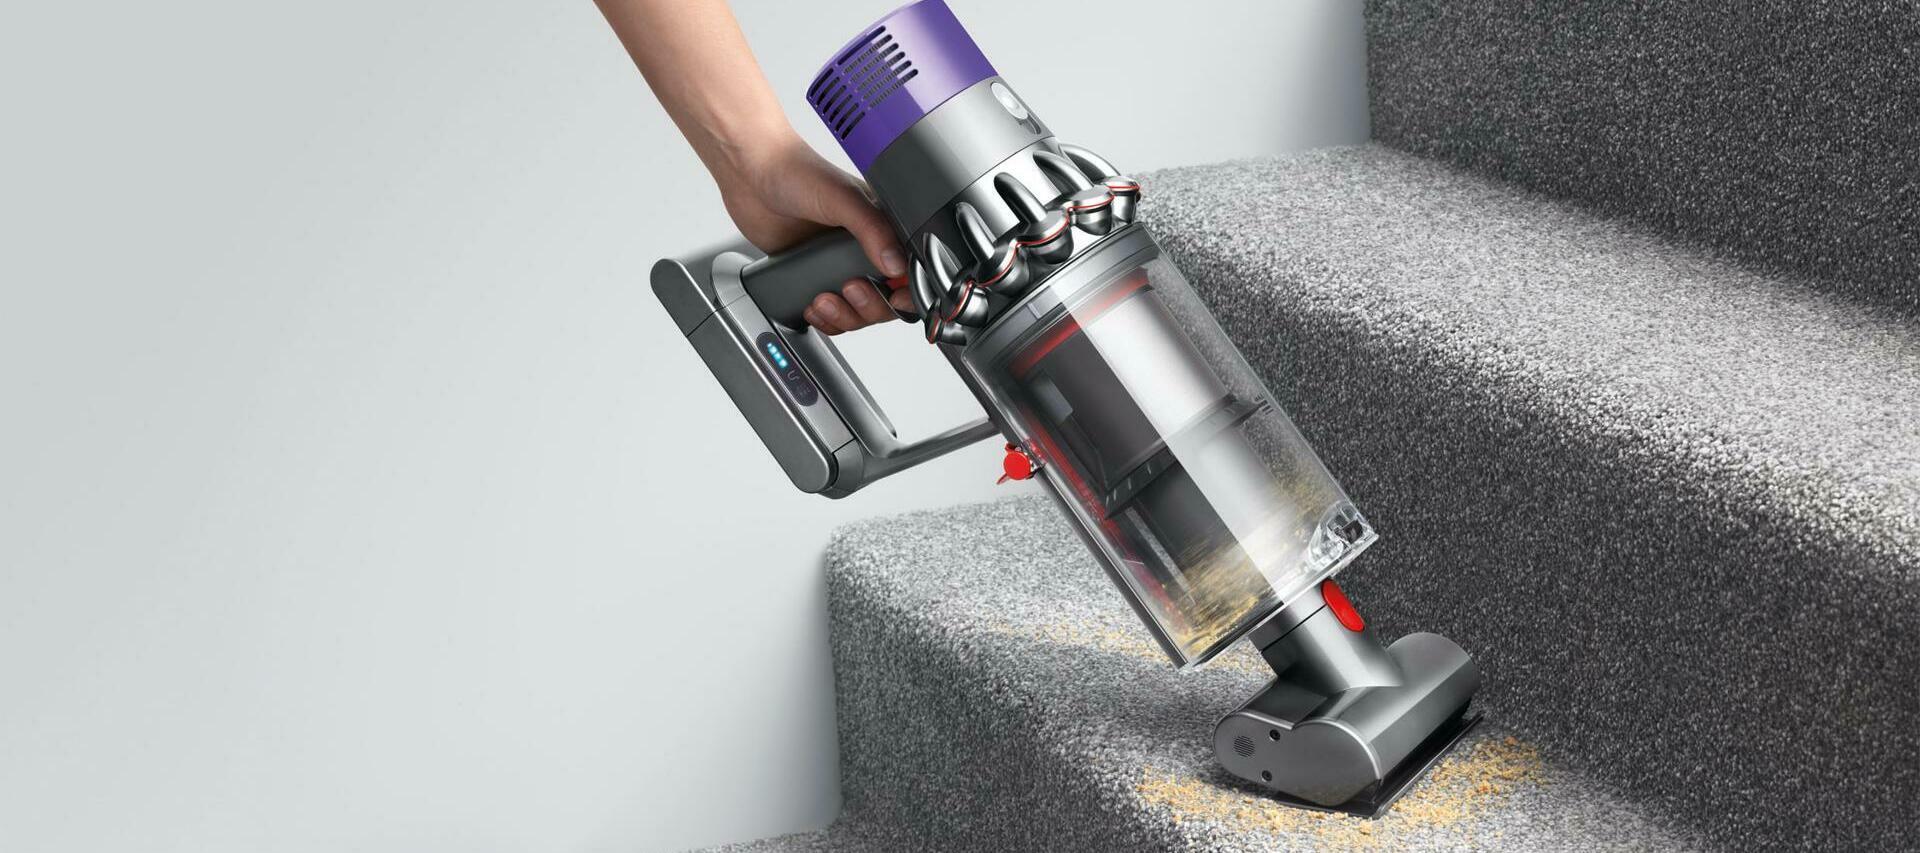 Dyson reveals the most neglected spots during a deep clean